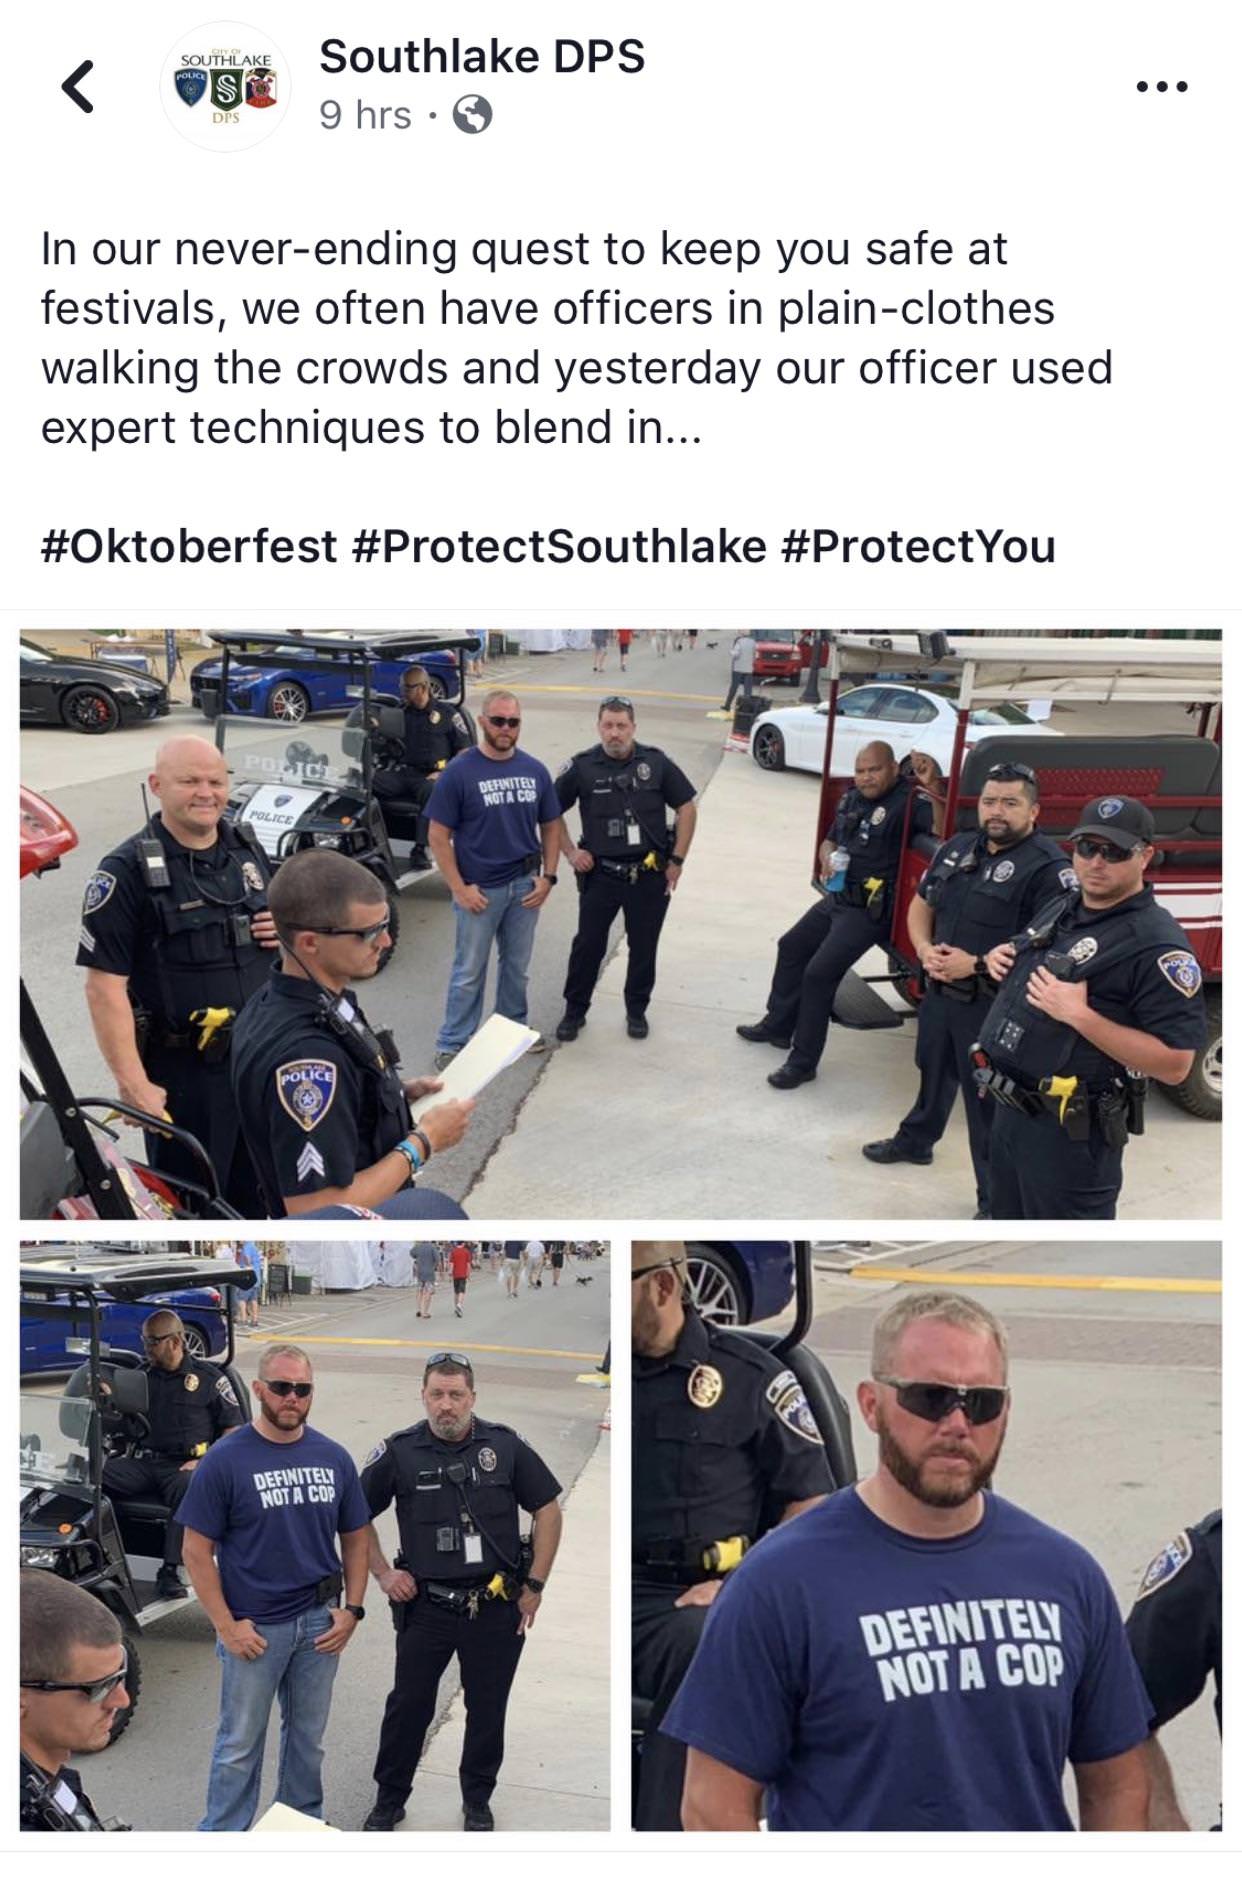 definitely not a cop shirt - Southlake Police Southlake Dps 9 hrs Dps In our neverending quest to keep you safe at festivals, we often have officers in plainclothes walking the crowds and yesterday our officer used expert techniques to blend in... ci Defi